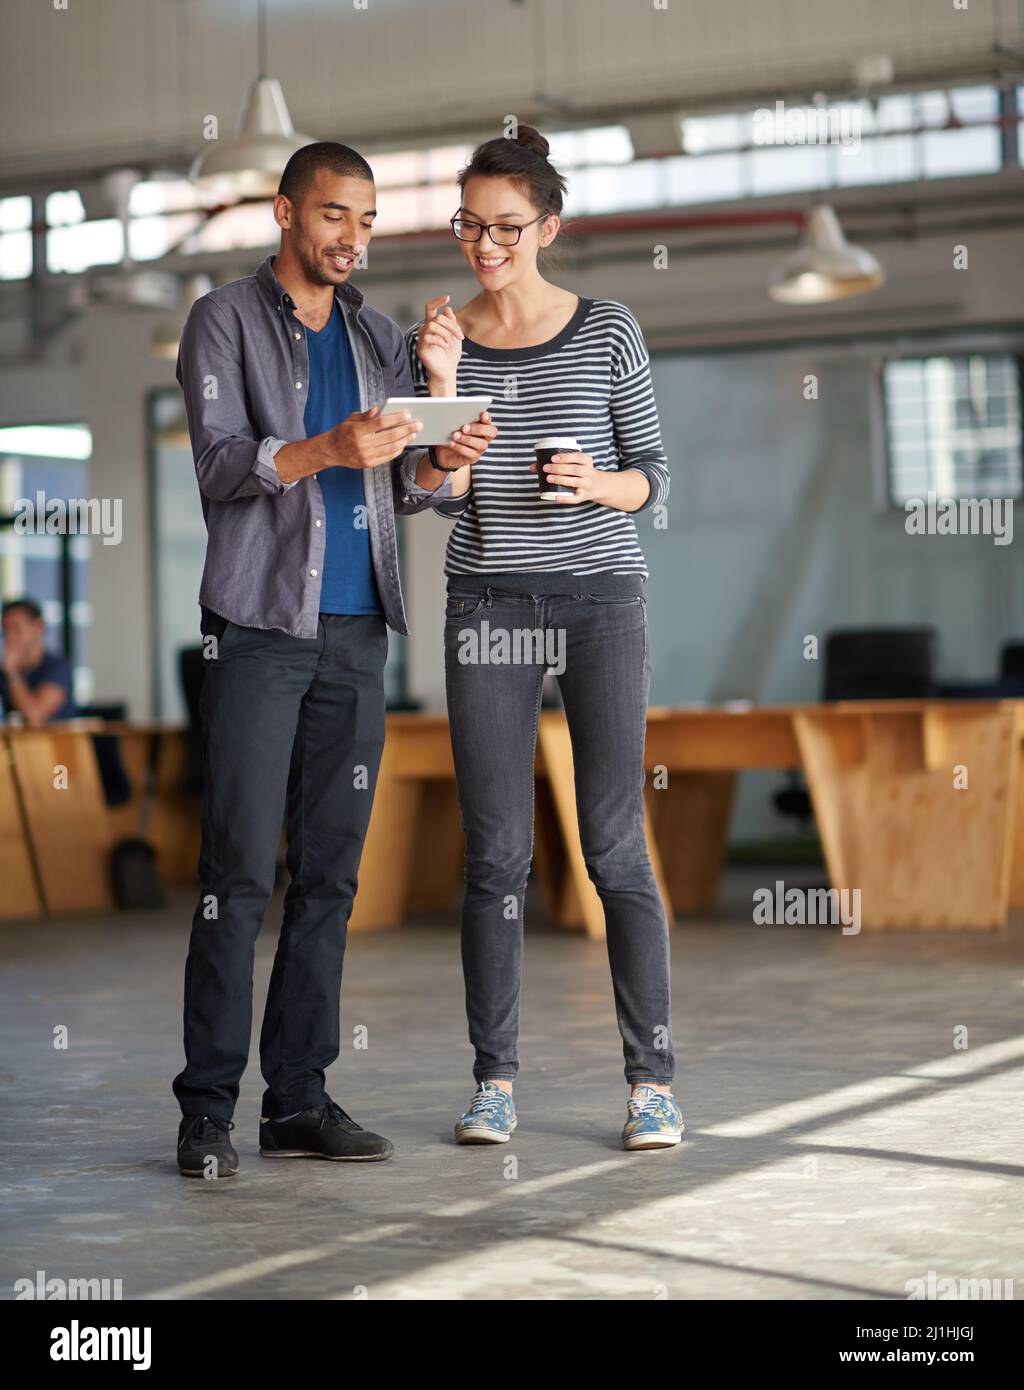 Sharing the industry developments. Young woman seeing something entertaining on her colleagues digital tablet. Stock Photo